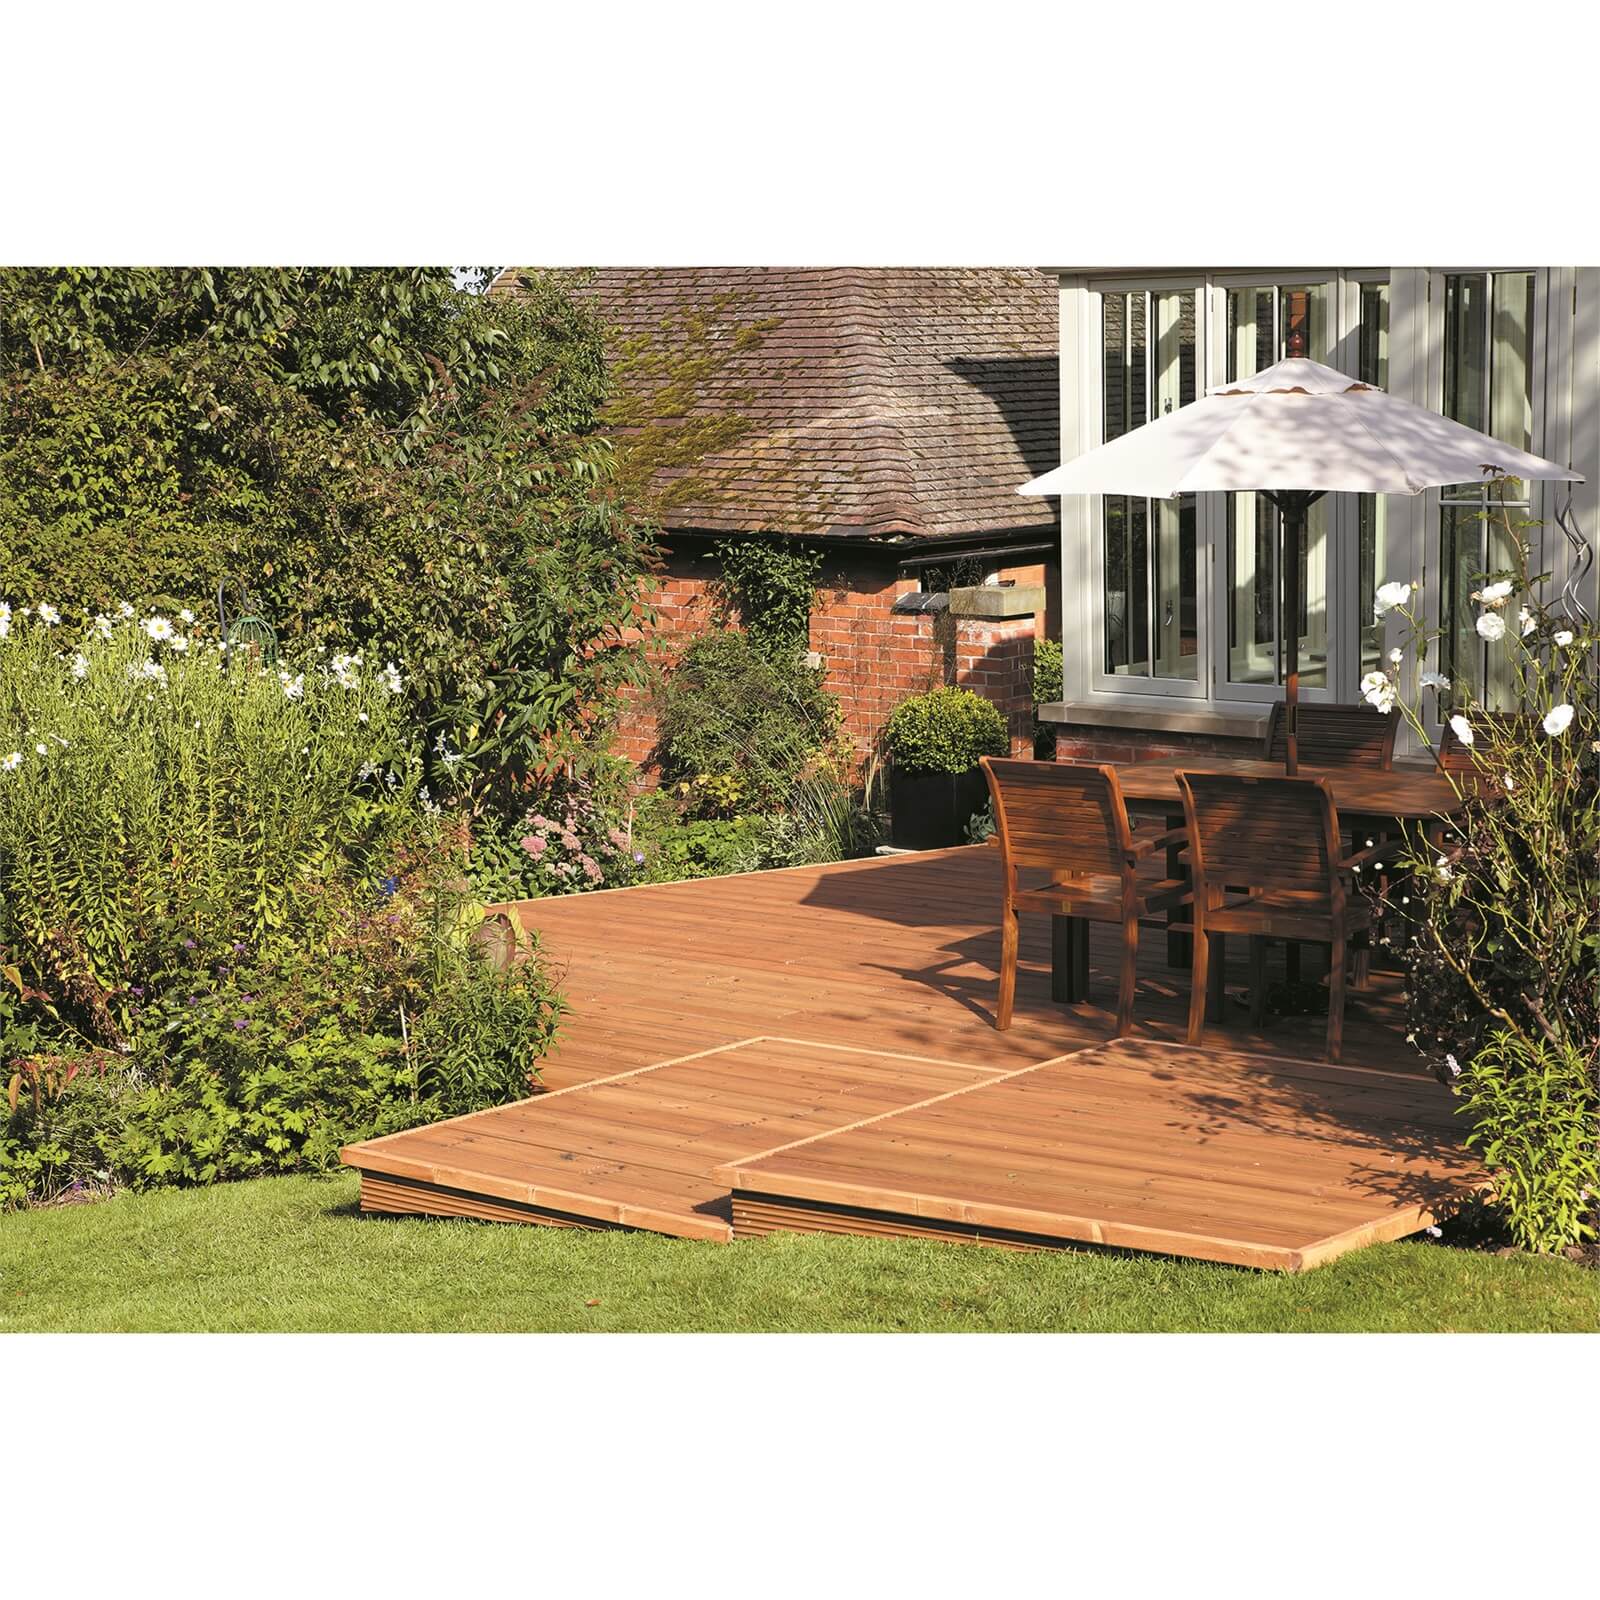 Ronseal Standard Decking Stain Country Oak - 5L